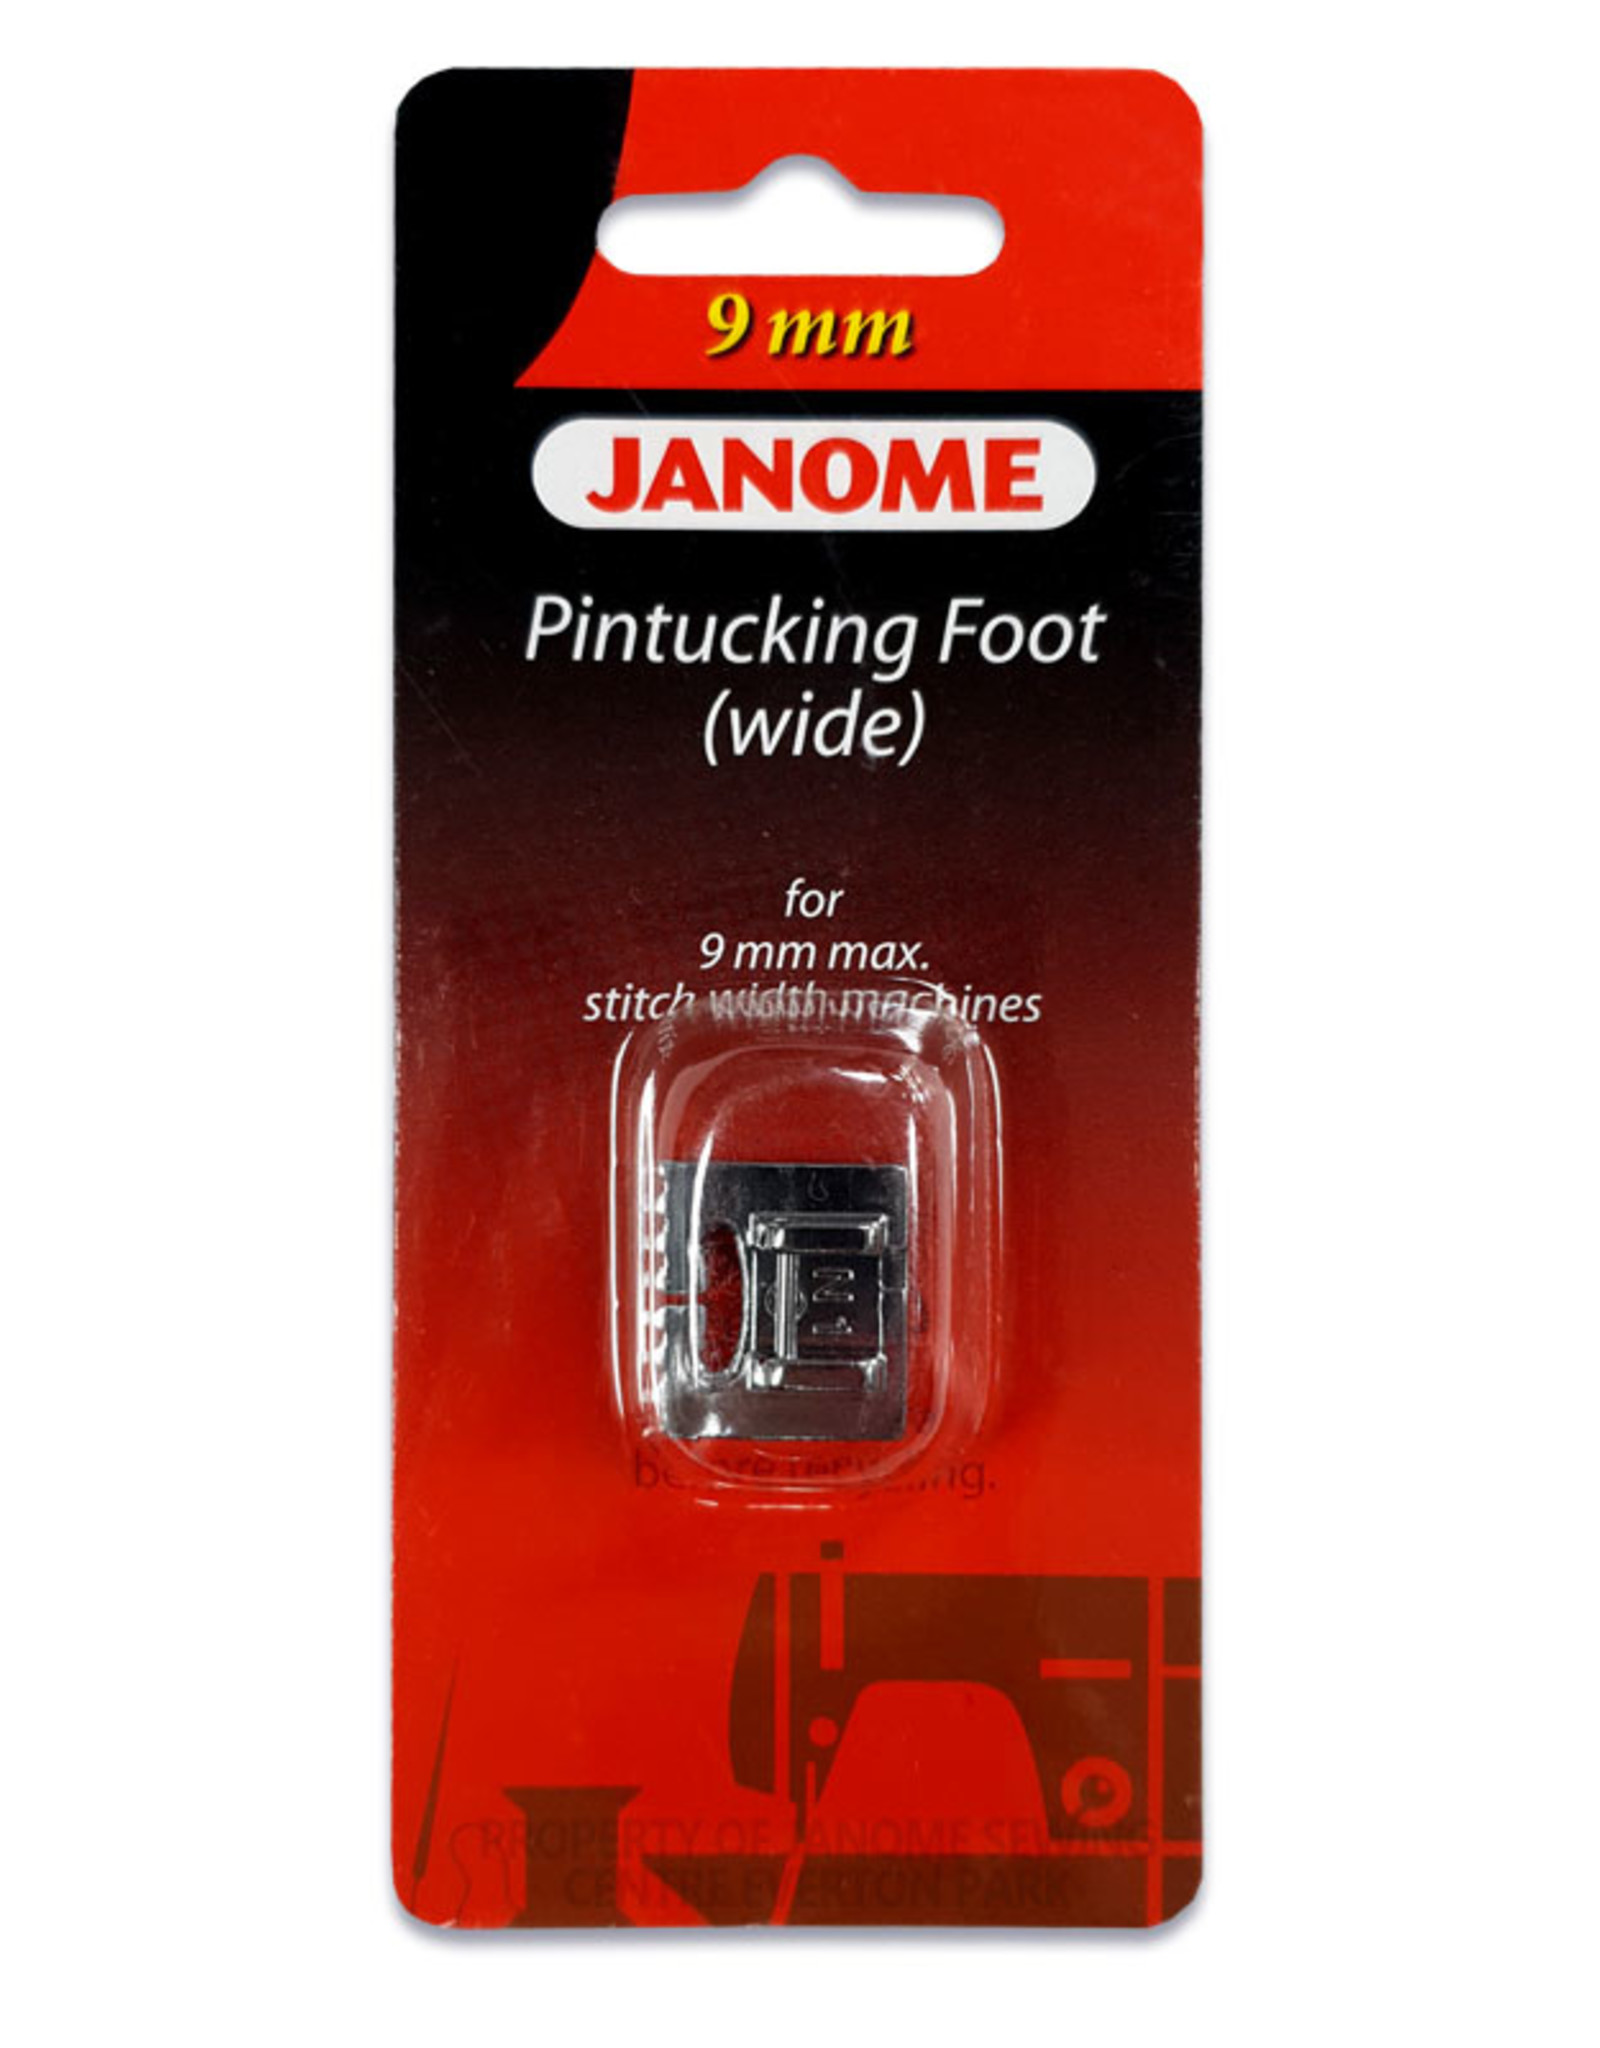 Janome 9mm Pintucking Foot (wide)- 202093002